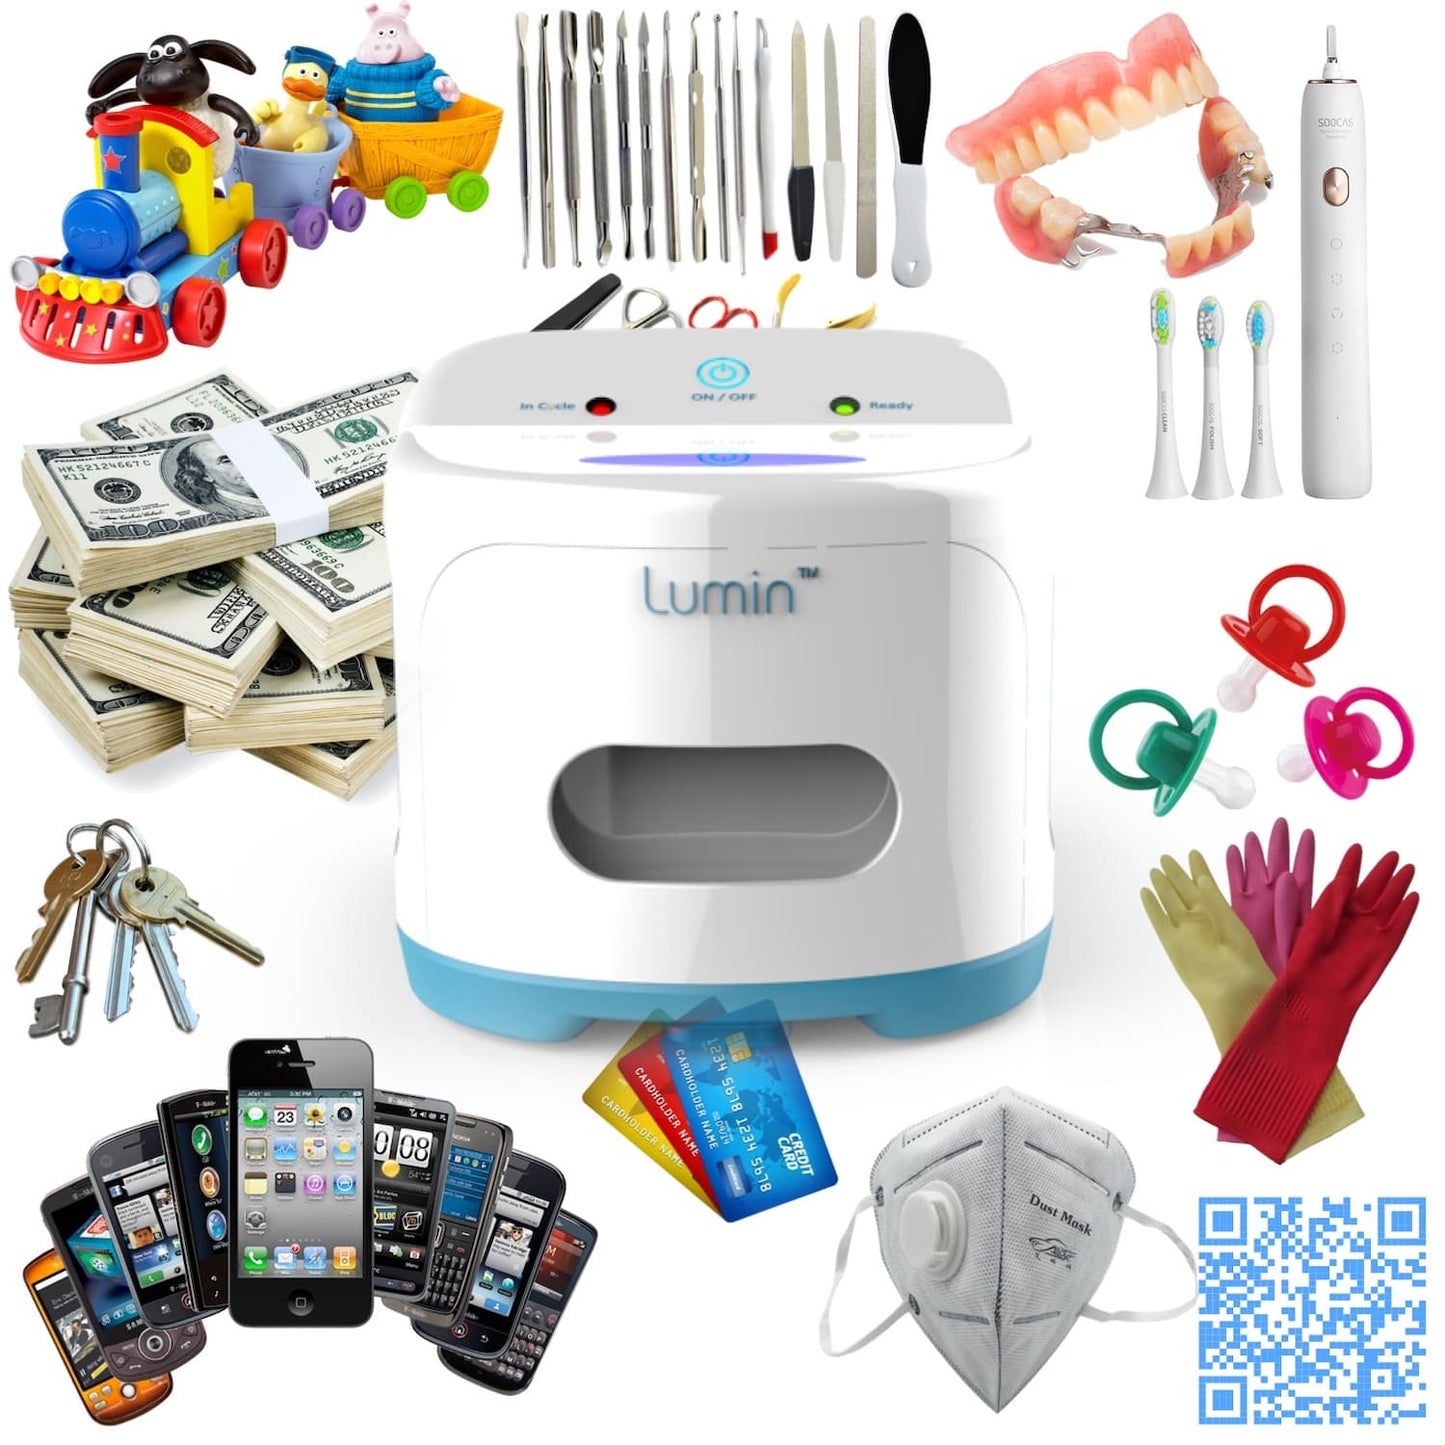 Lumin UVC - Sanitizing System Interface, Accessories Cleaner